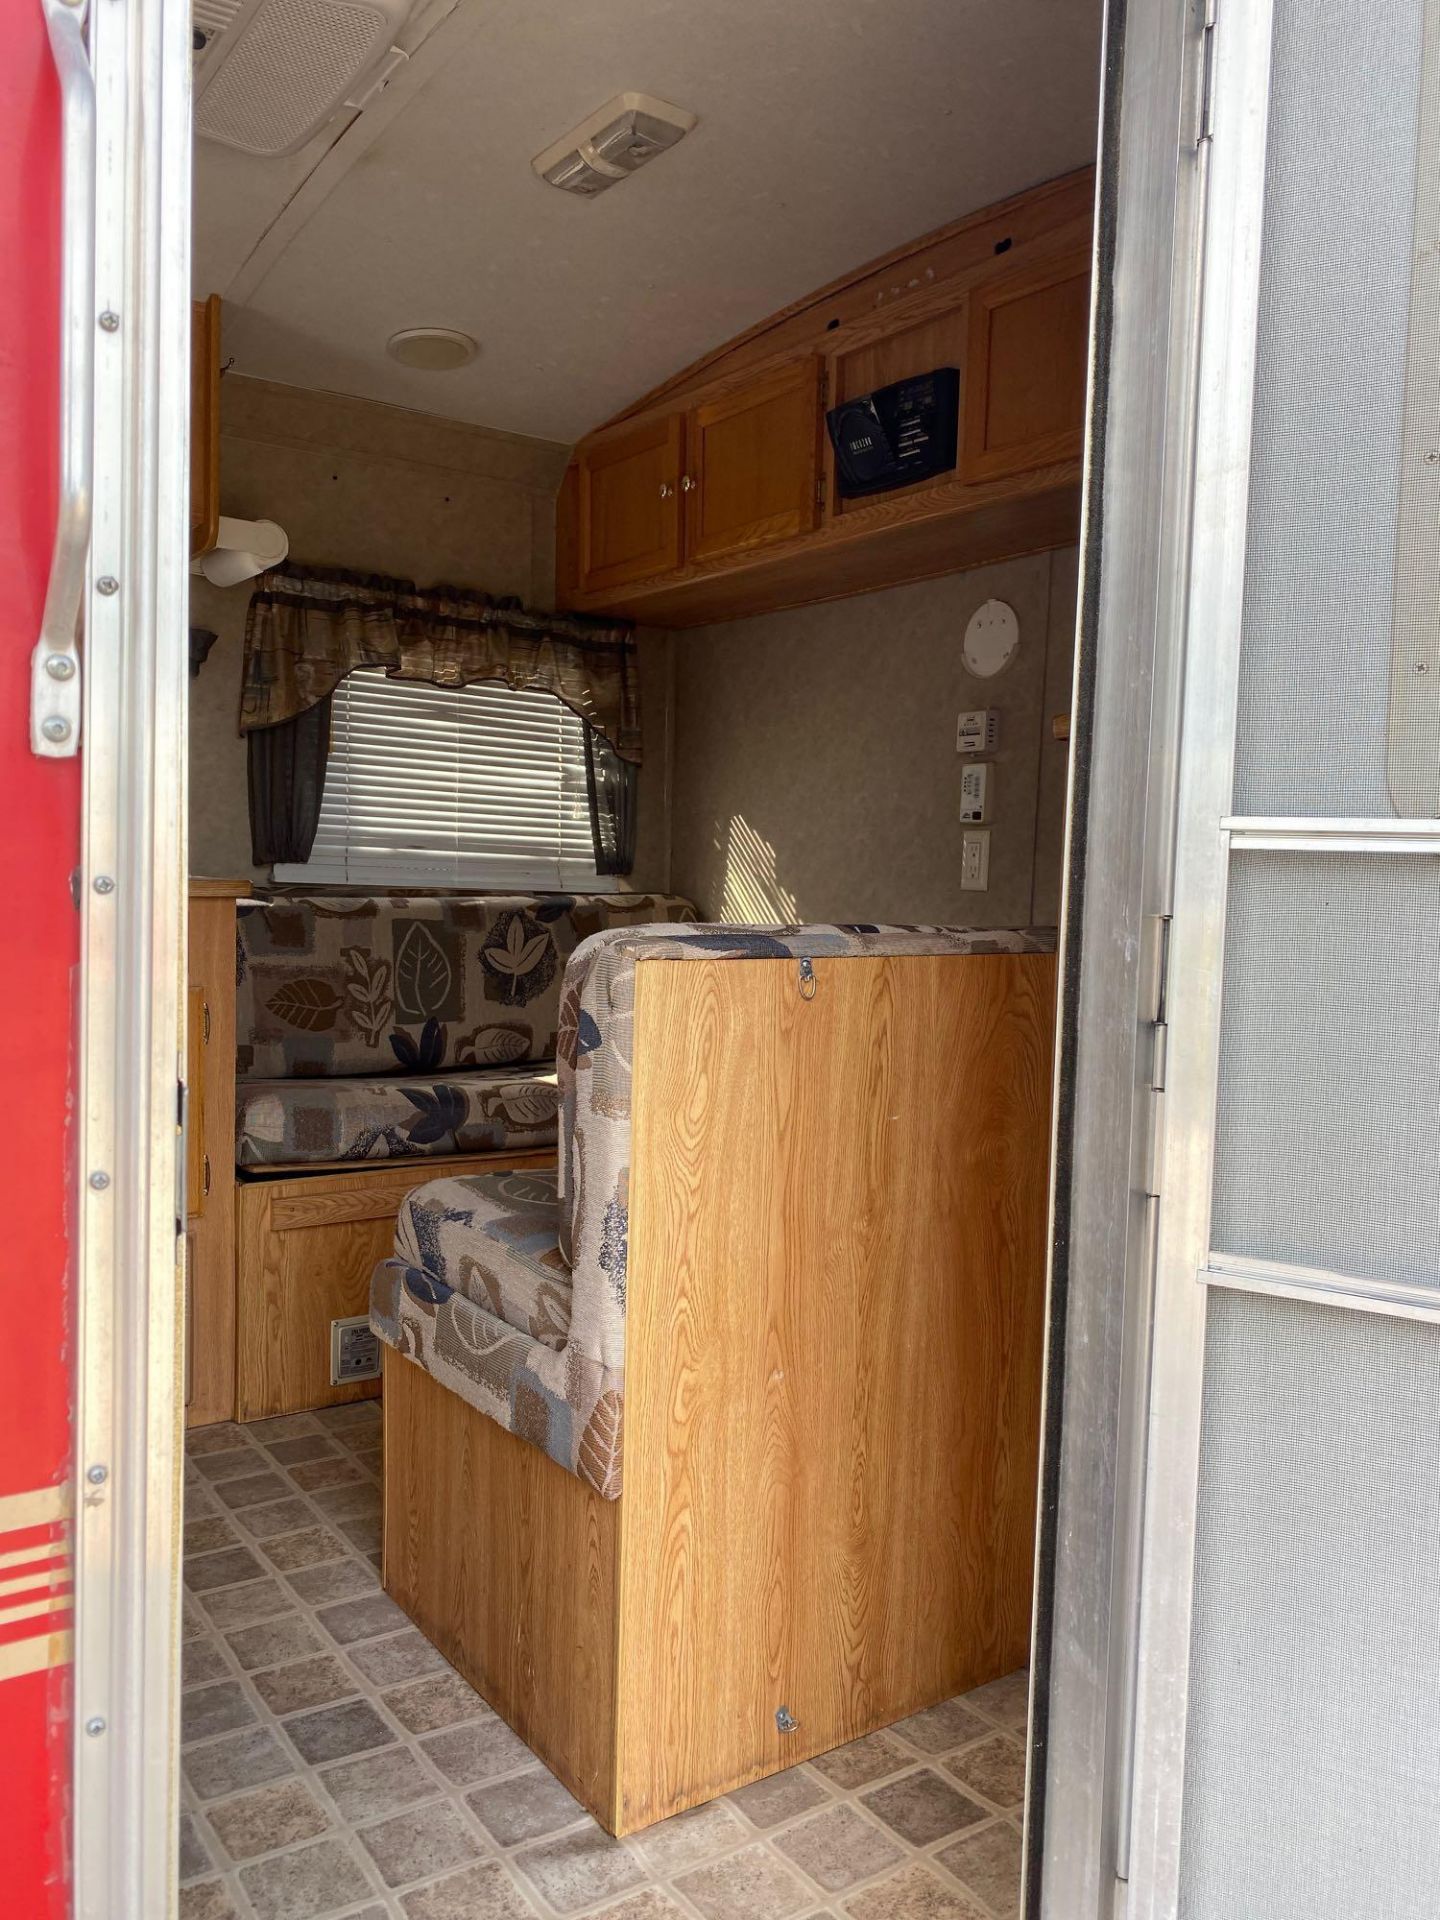 CAMP MASTER DUAL AXLE TRAILER, FOLD OUT REAR RAMP, SIDE DOOR ENTRANCE, BATHROOM WITH SHOWER, MICROWA - Image 9 of 16